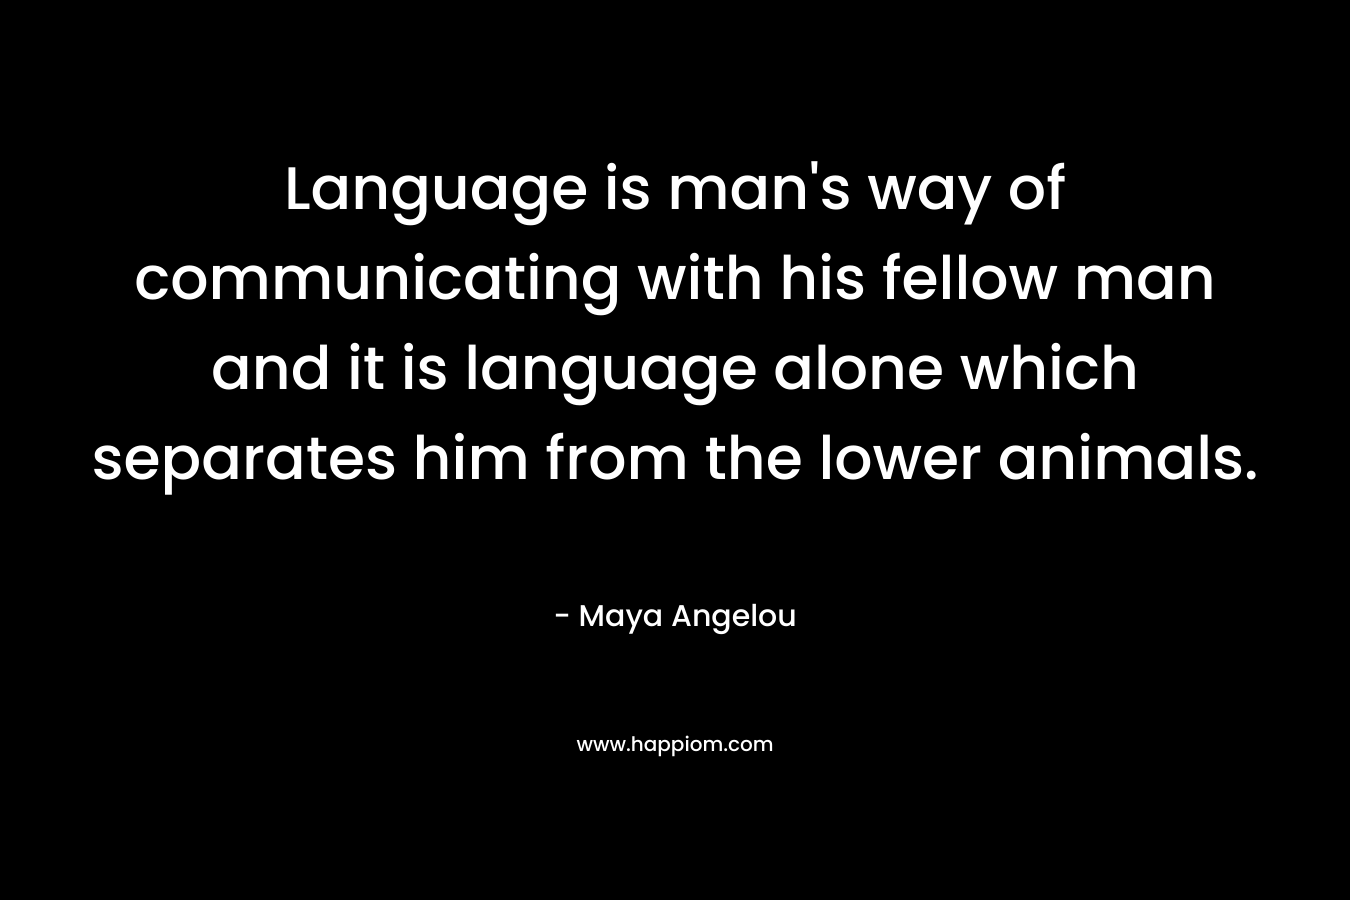 Language is man’s way of communicating with his fellow man and it is language alone which separates him from the lower animals. – Maya Angelou